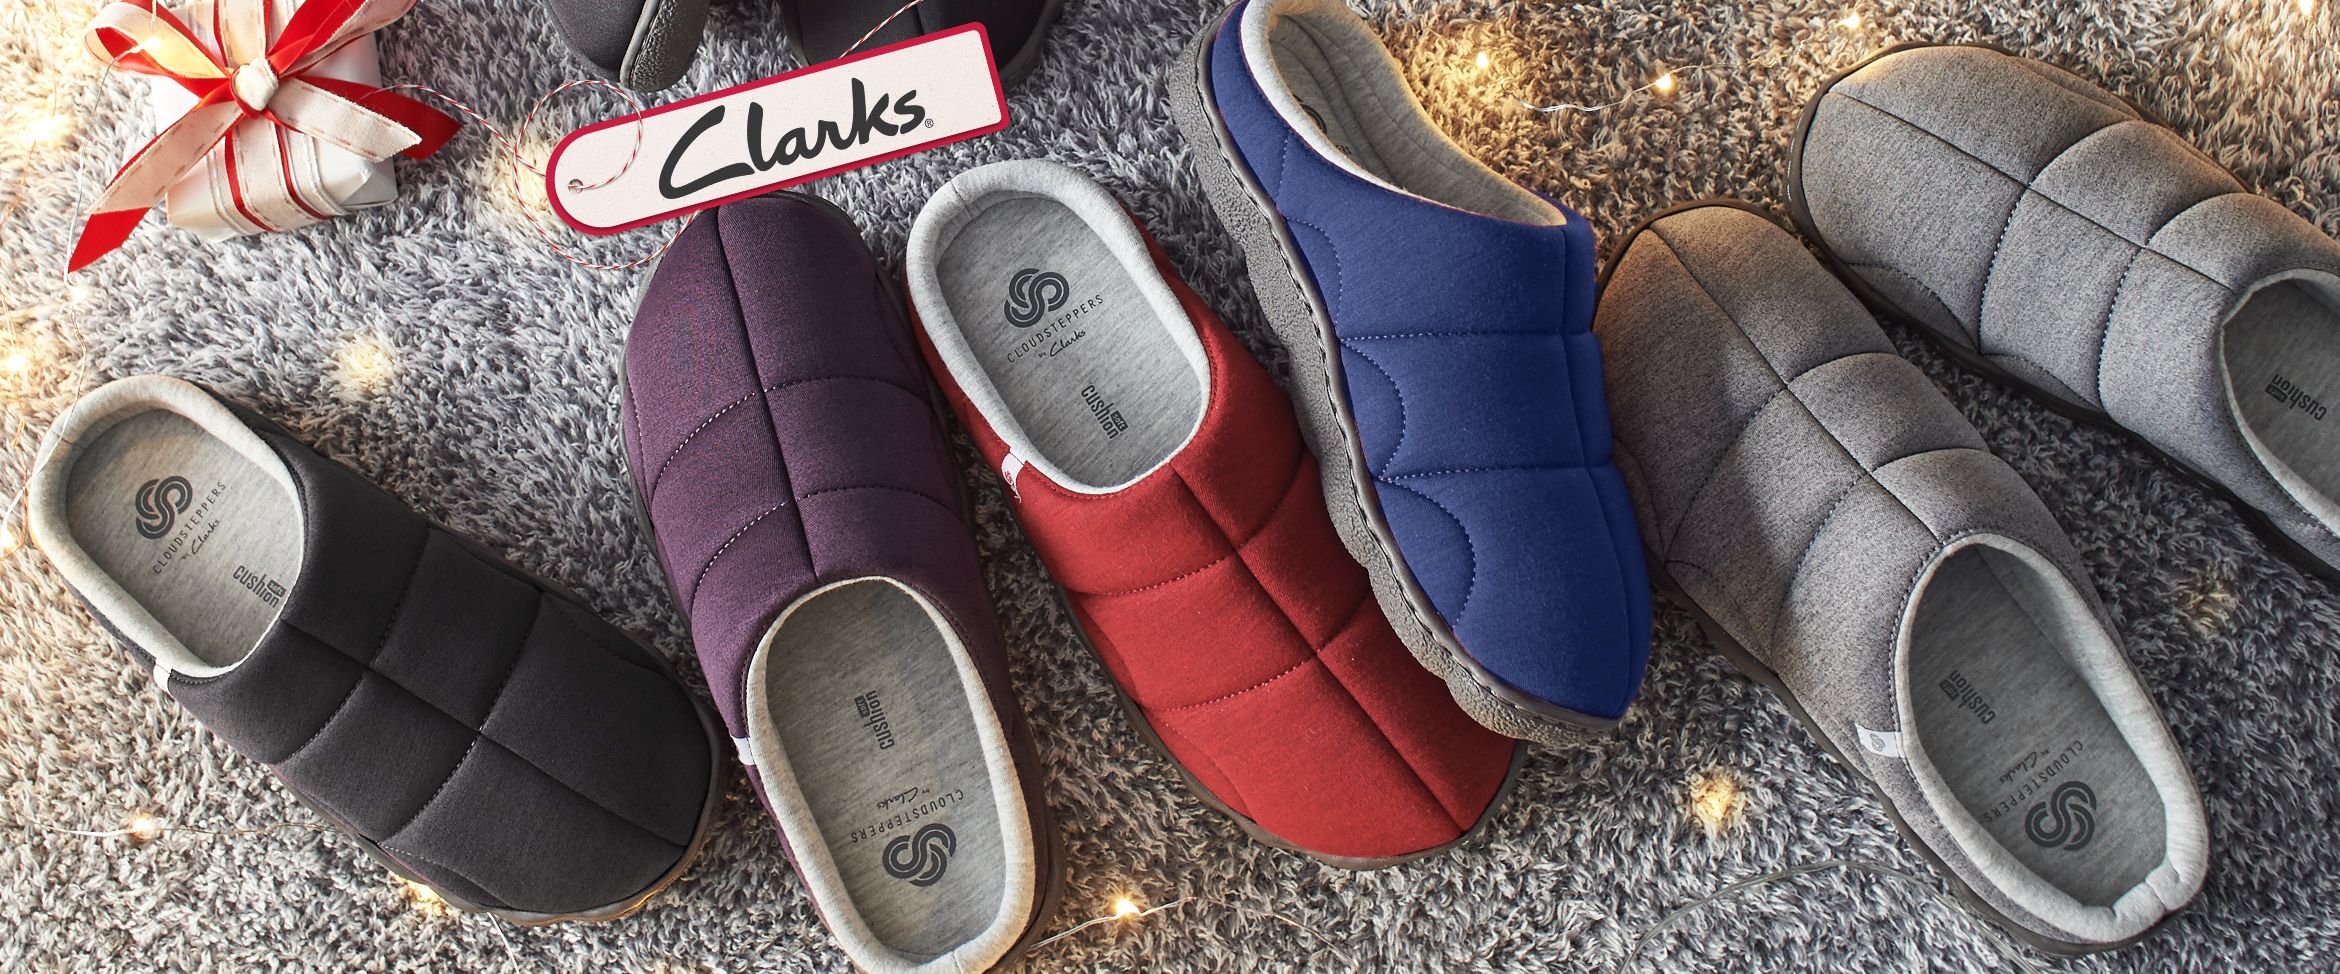 cloudsteppers by clarks jersey slippers